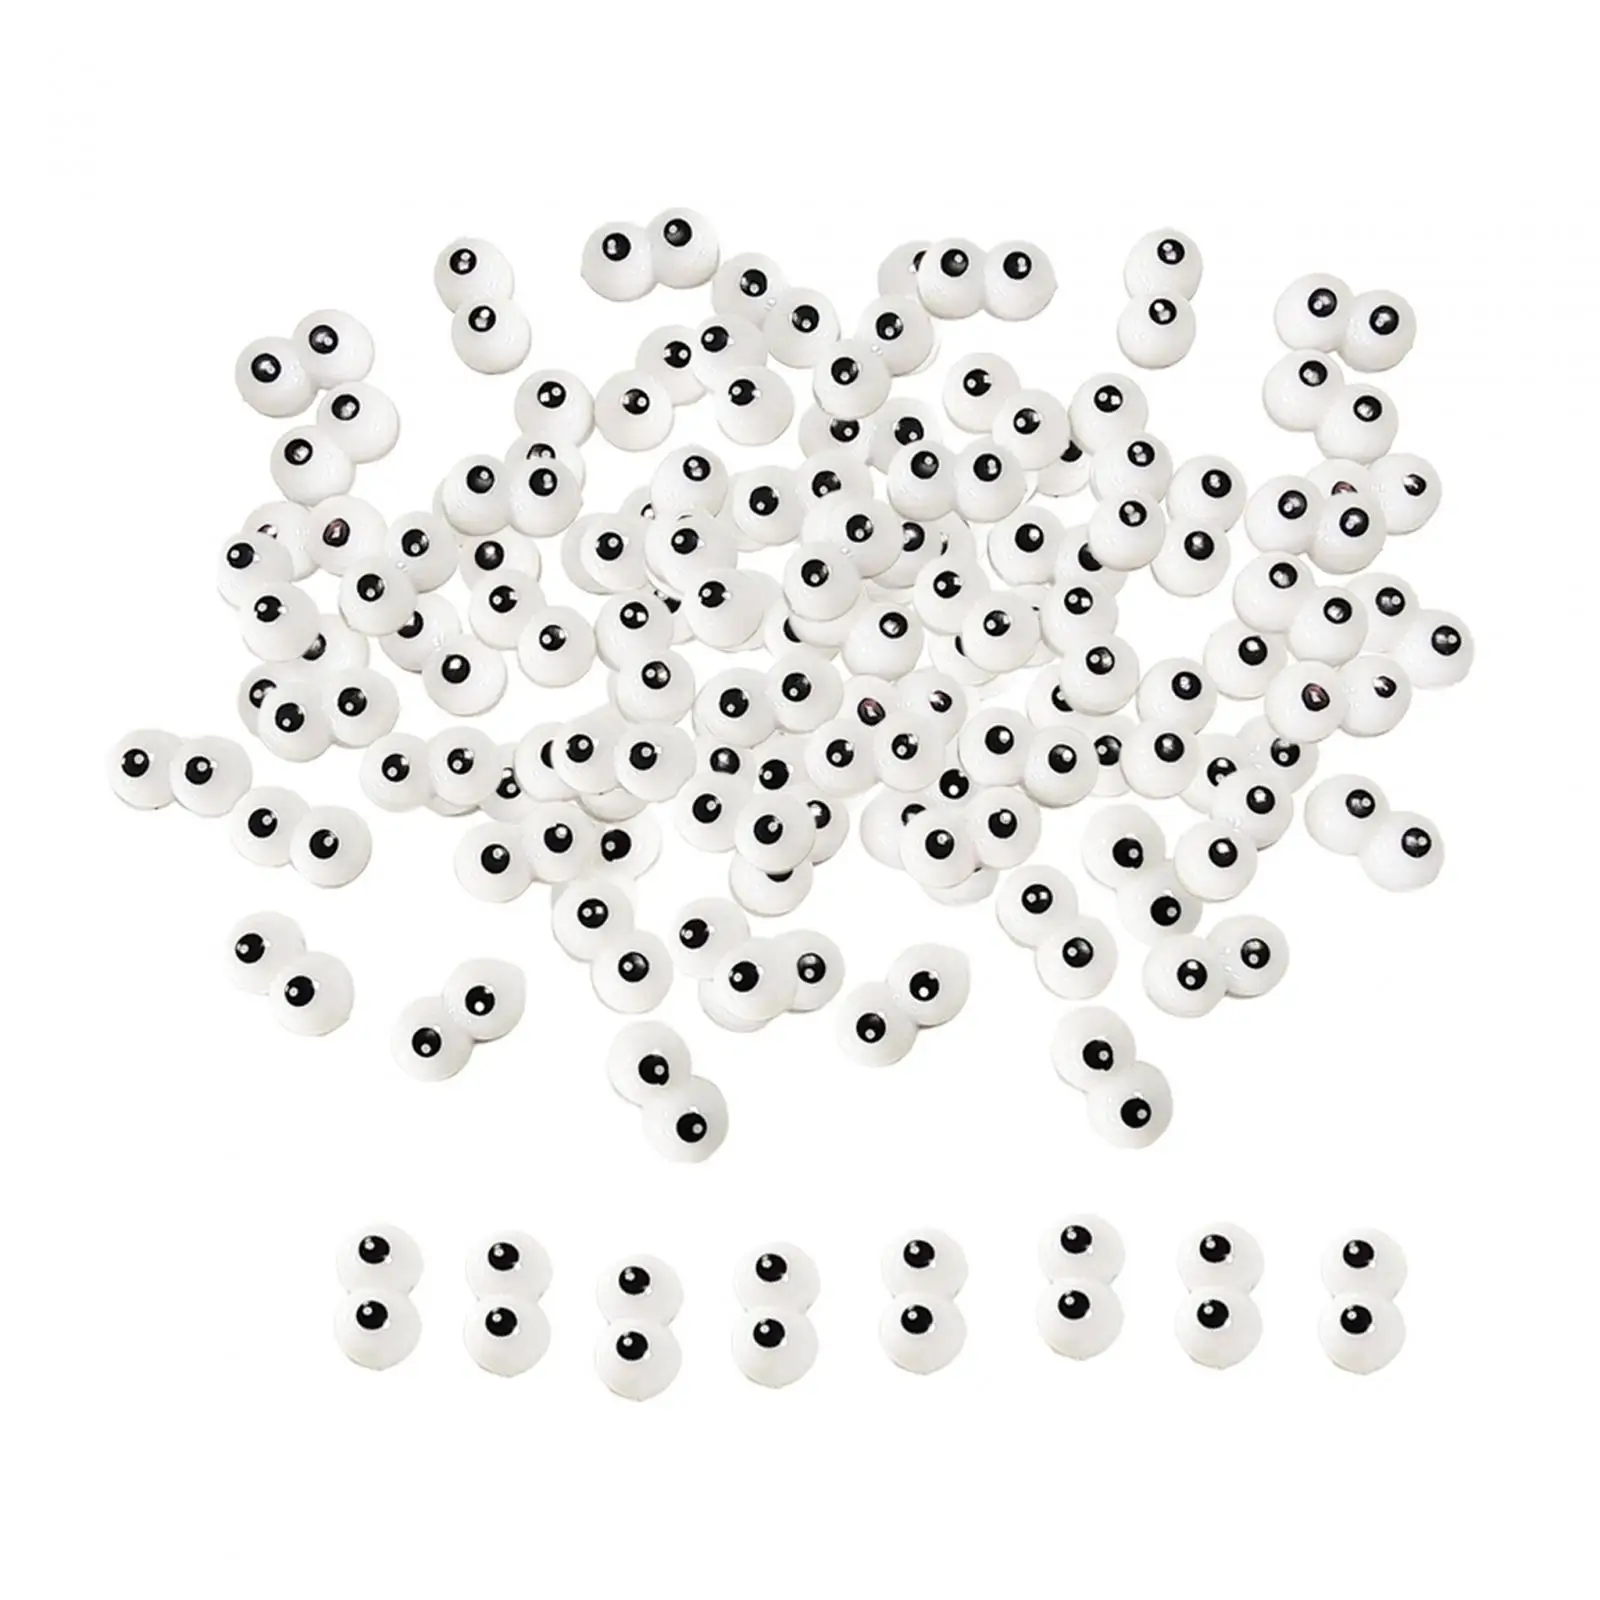 100Pcs Siamese Eye Accessories Festival Crochet Eyes Projects Puppet Toy Crafts Supplies Plush Doll Accessory Safety Eyes